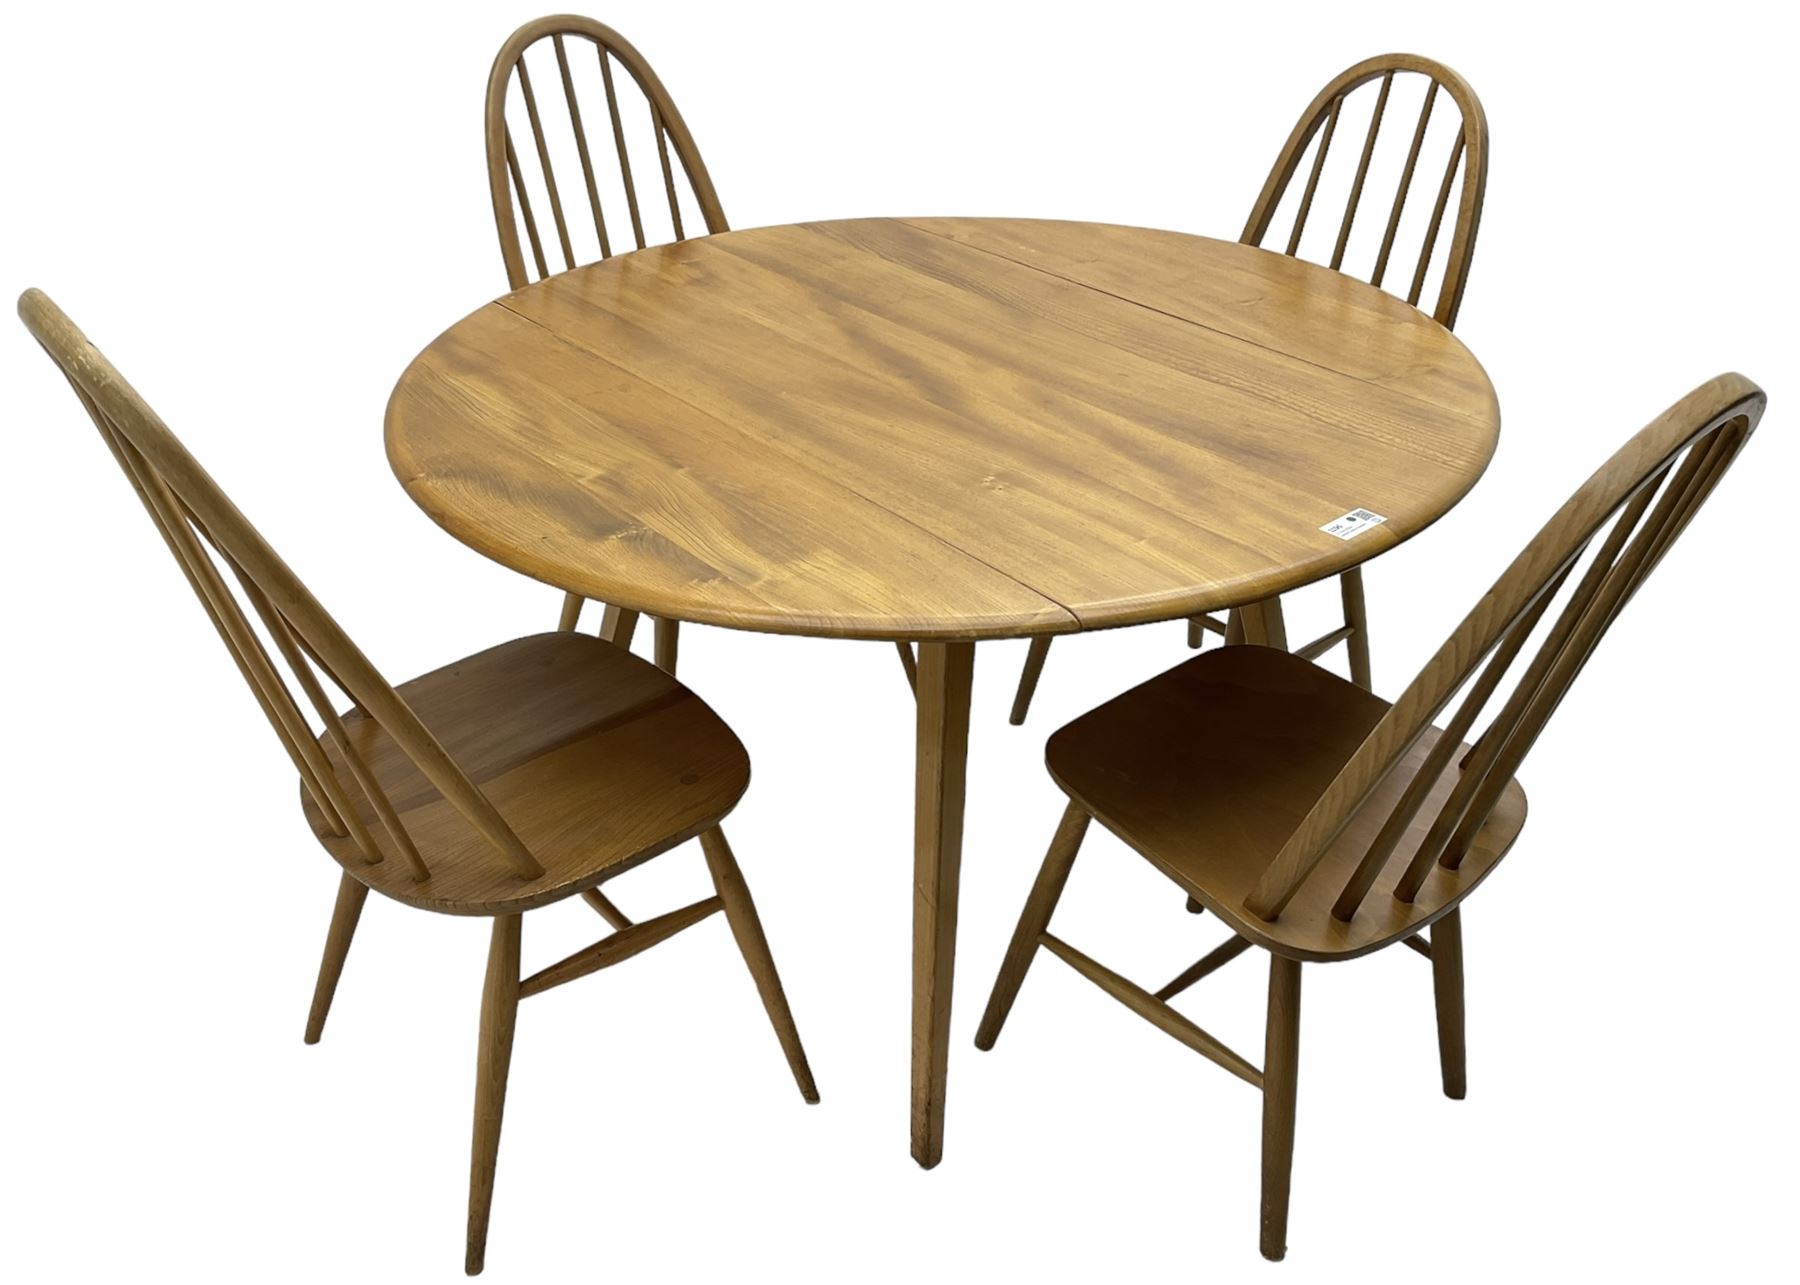 Ercol - elm and beech dining table - Image 2 of 7